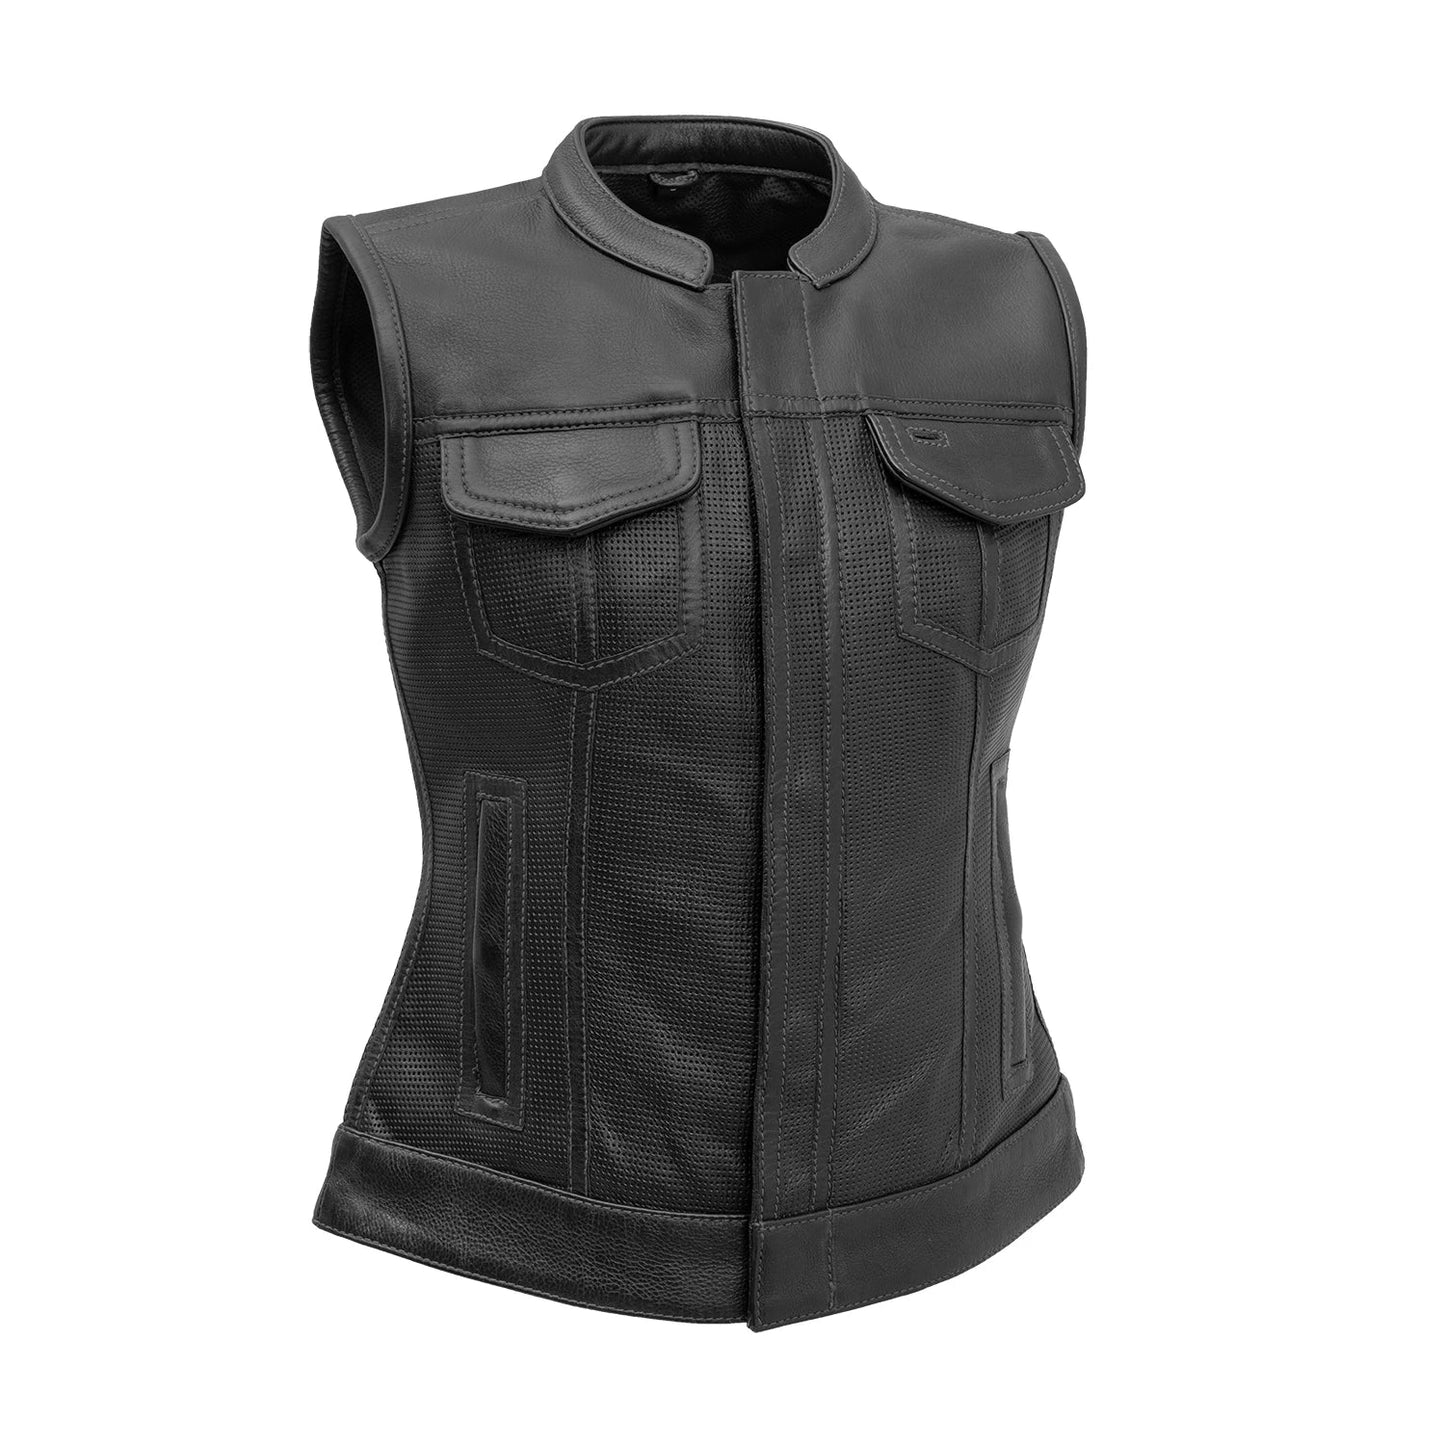 Jessica Perforated Women's Motorcycle Leather Vest Women's Vest First Manufacturing Company Black XS 